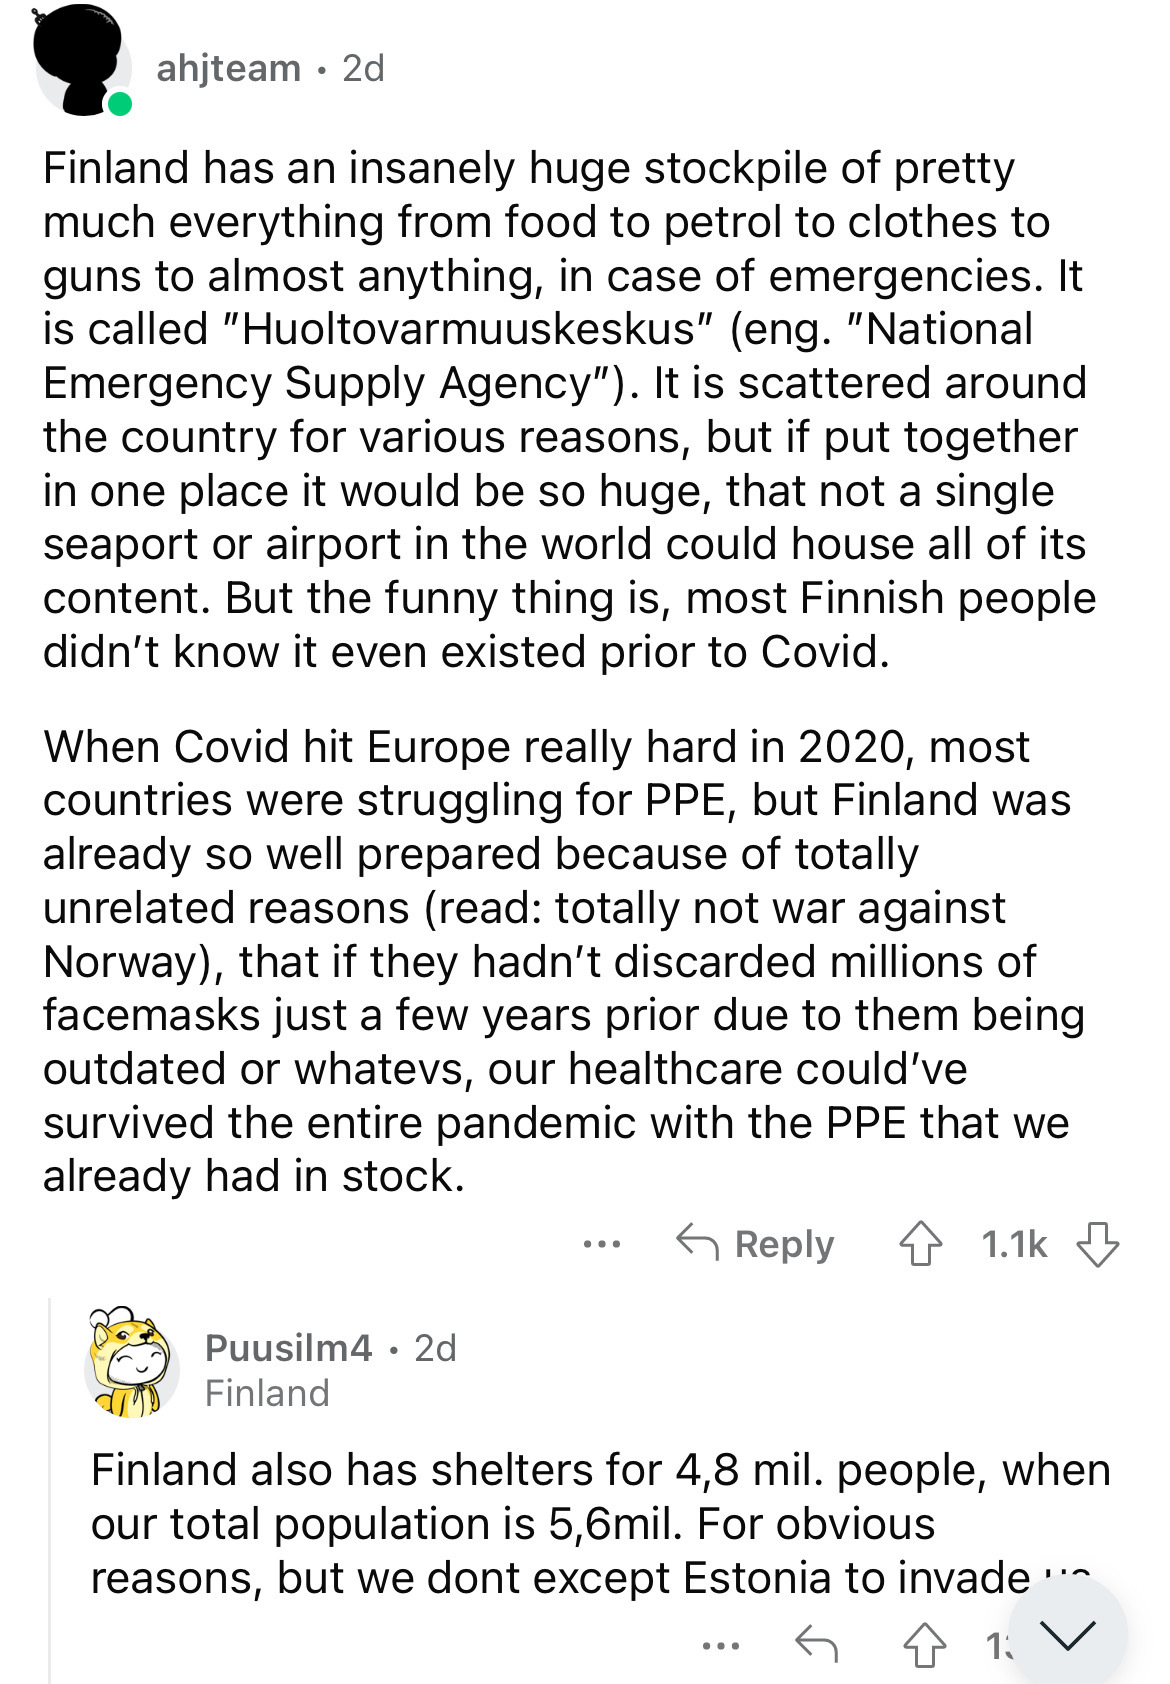 document - ahjteam 2d Finland has an insanely huge stockpile of pretty much everything from food to petrol to clothes to guns to almost anything, in case of emergencies. It is called "Huoltovarmuuskeskus" eng. "National Emergency Supply Agency". It is sca